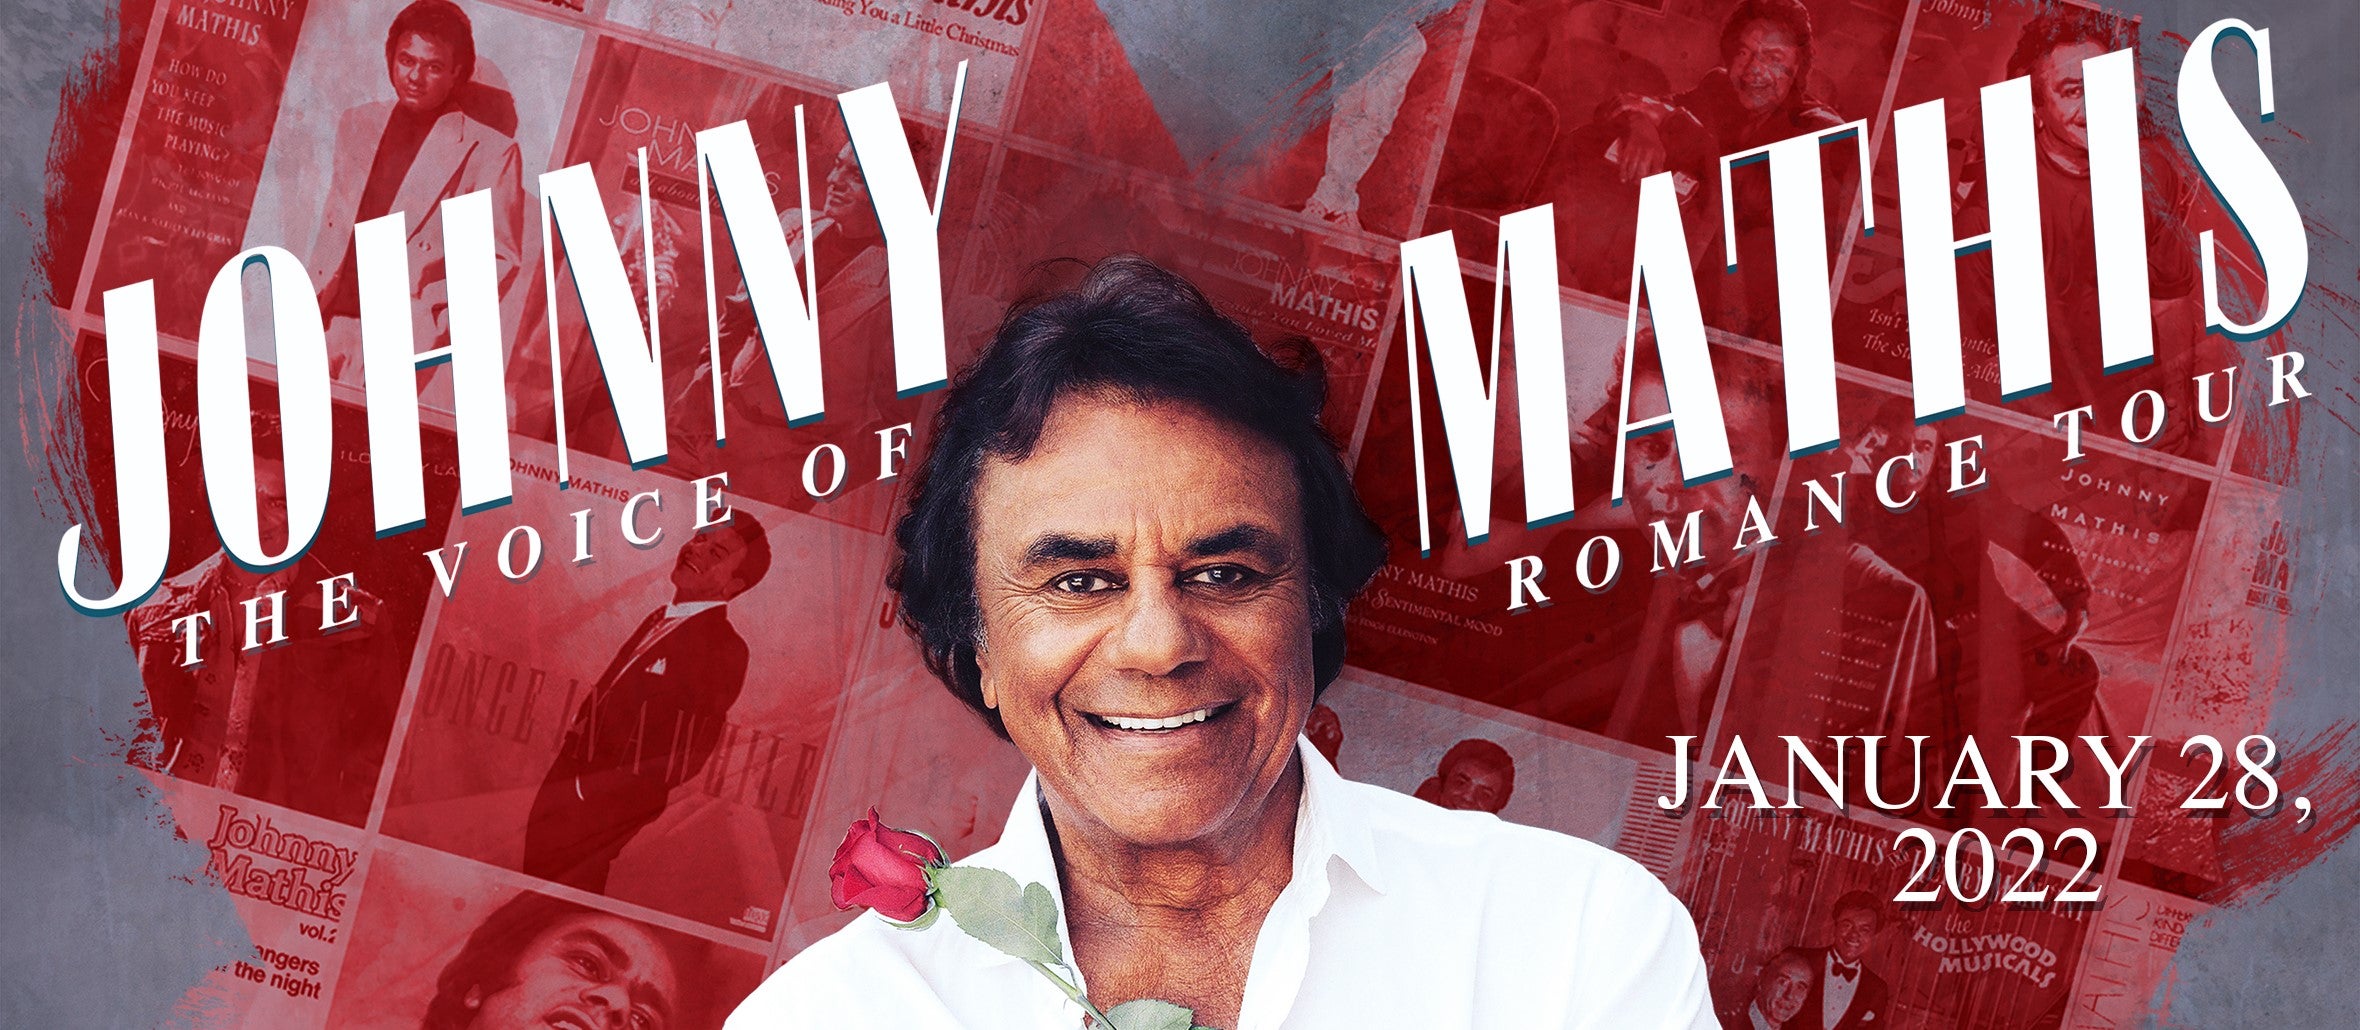 Johnny Mathis: The Voice of Romance Tour 2022